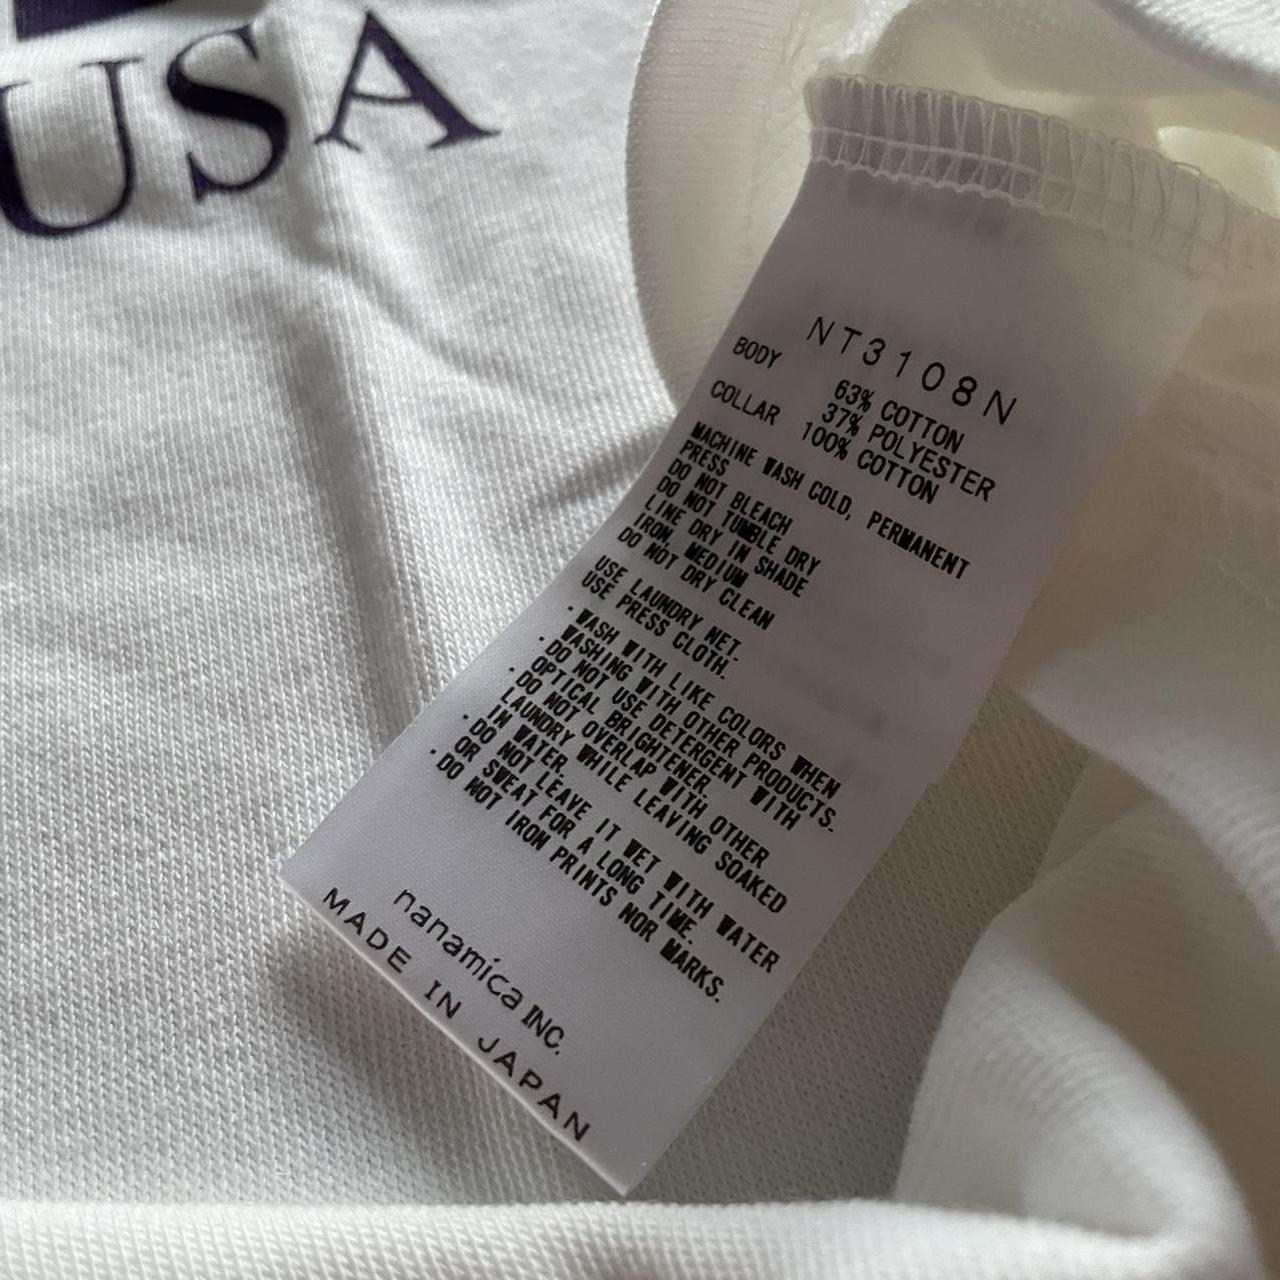 The North Face Purple Label Men's White and Purple T-shirt (3)